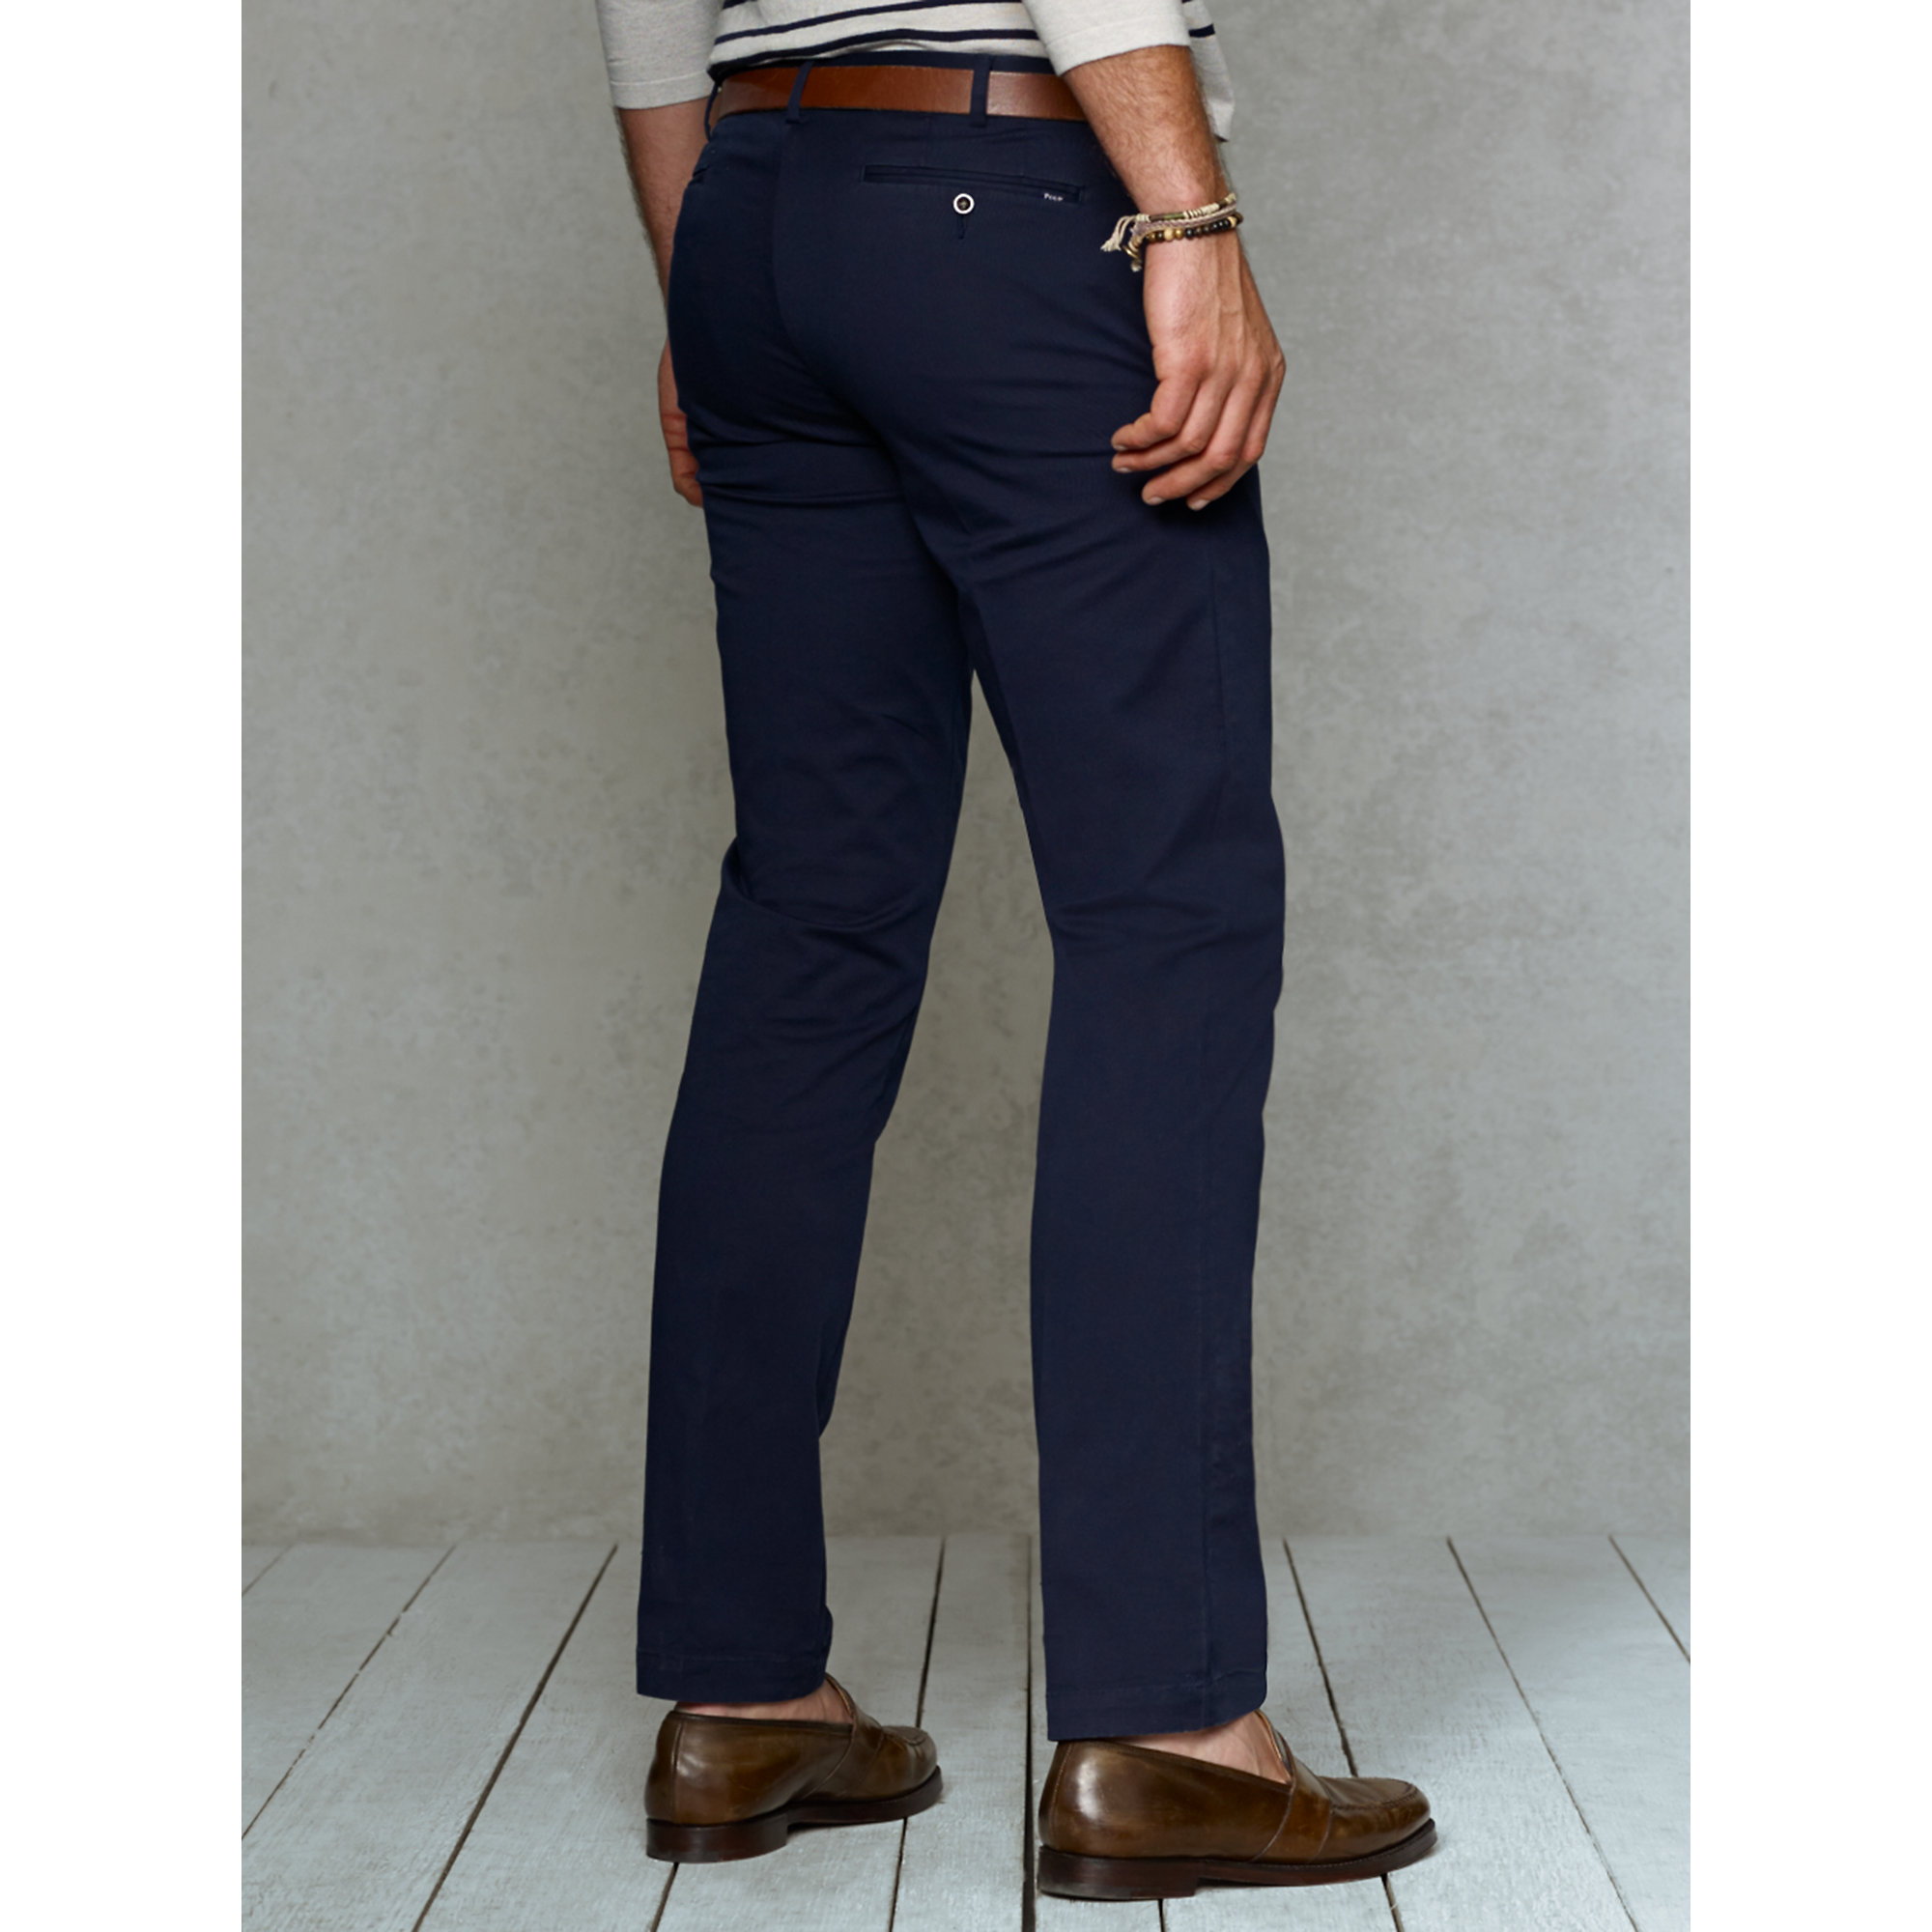 Polo Ralph Lauren Slim-fit Stretch-chino Pant in Blue for Men - Lyst